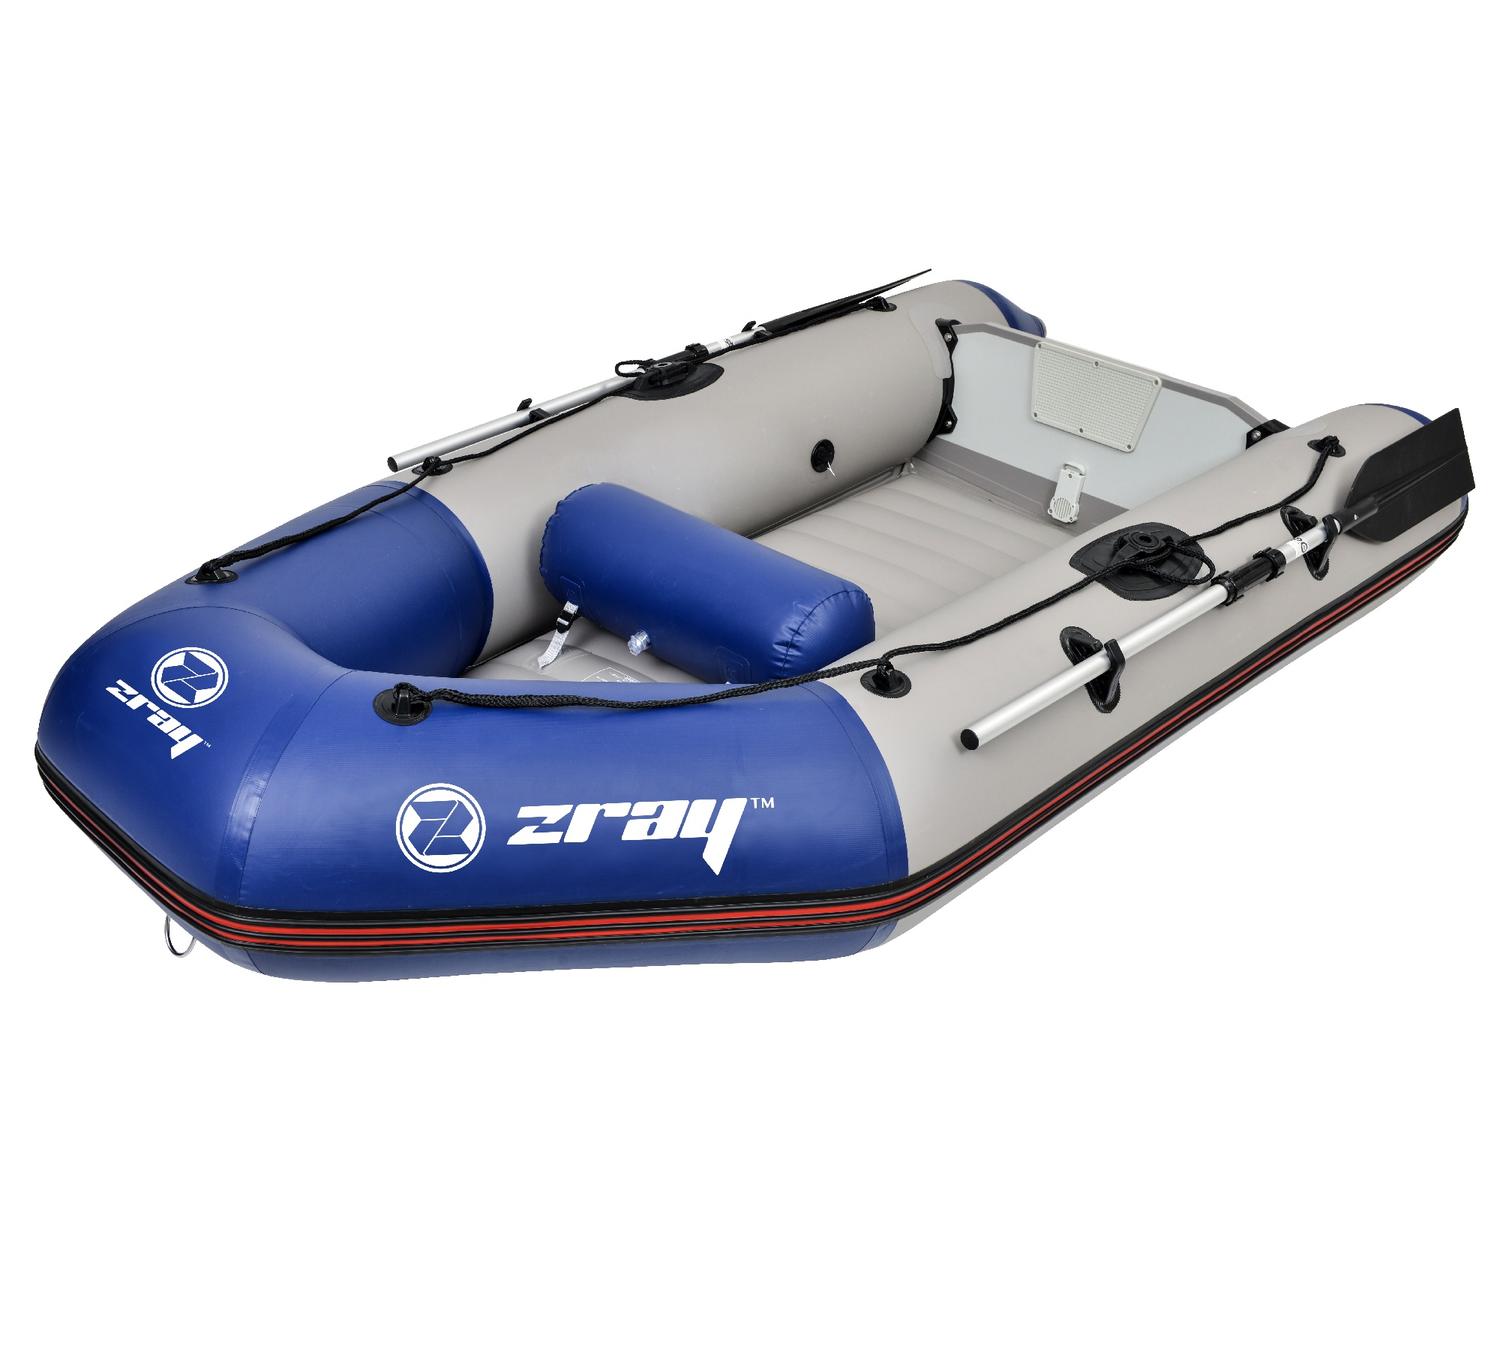 Zray Javelin IV 300 Inflatable Dinghy Boat with Oars